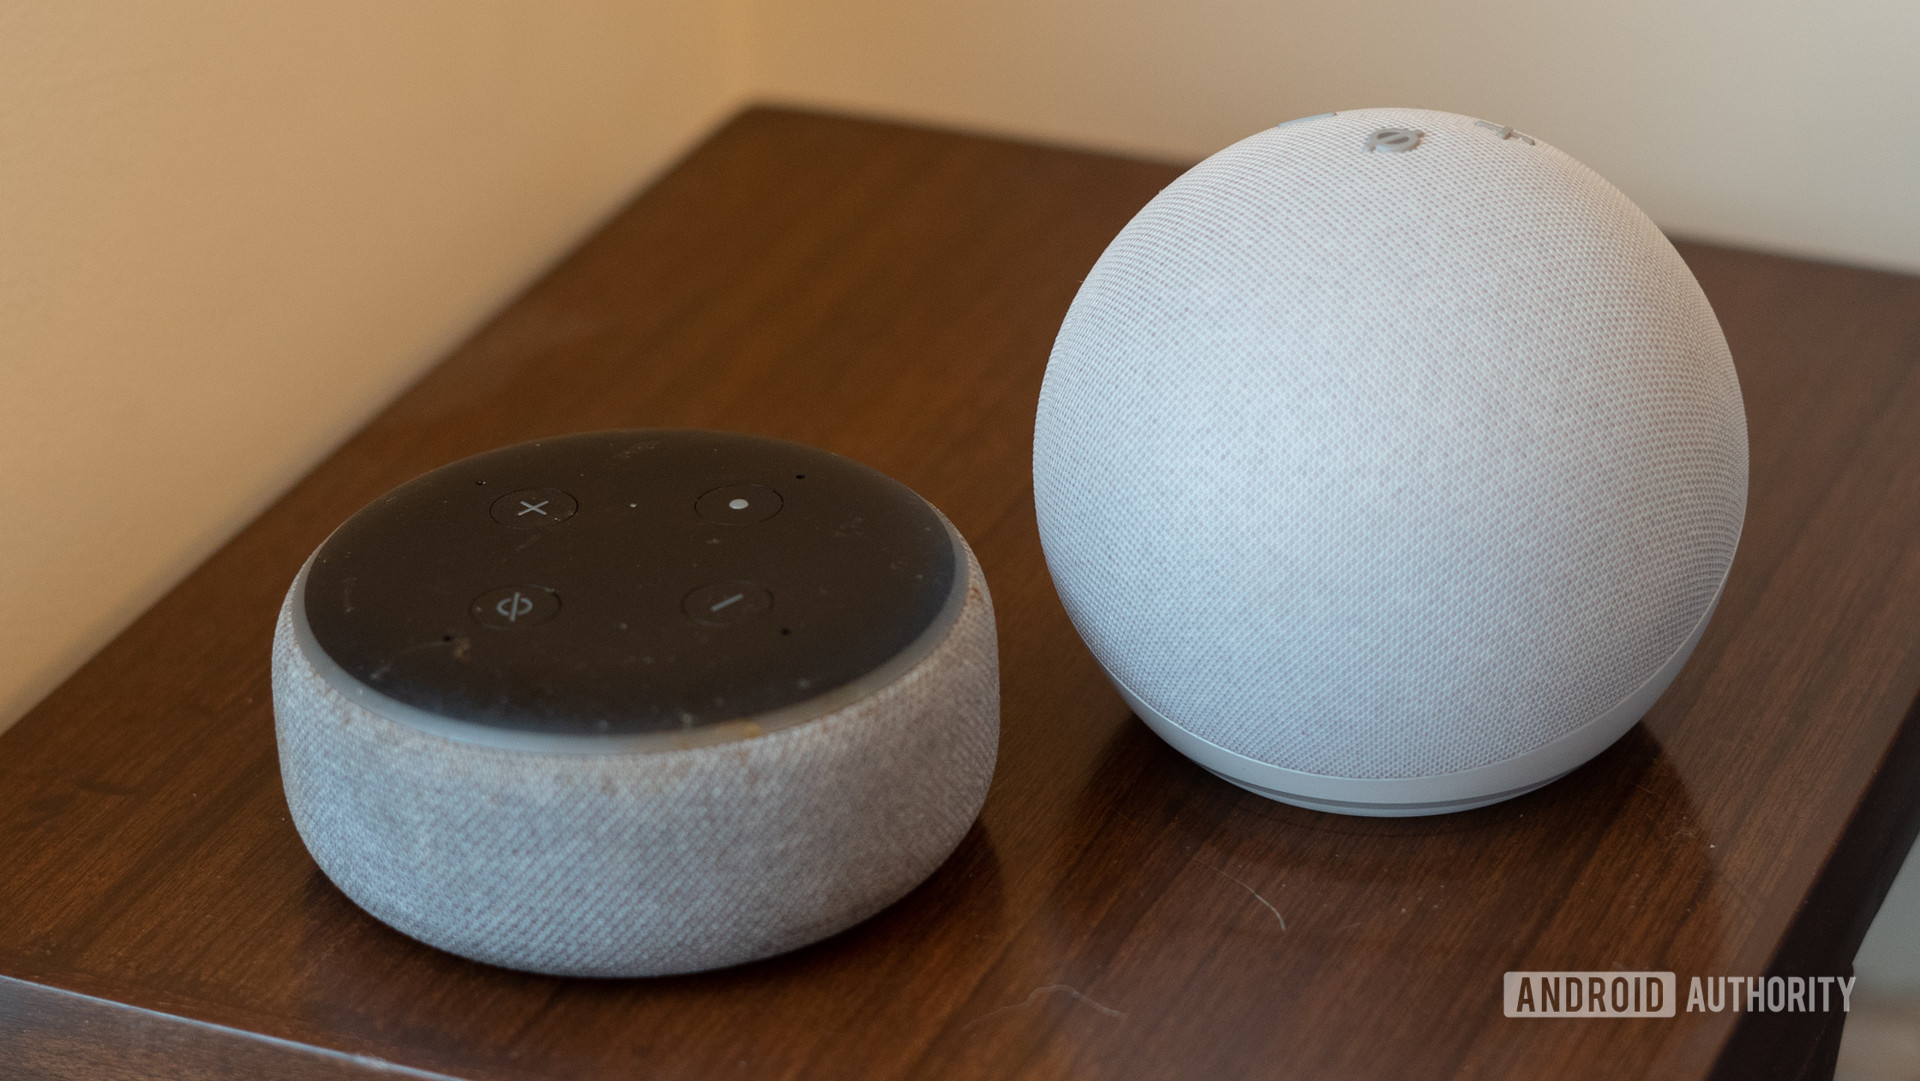 A 2020 Echo Dot with an older model